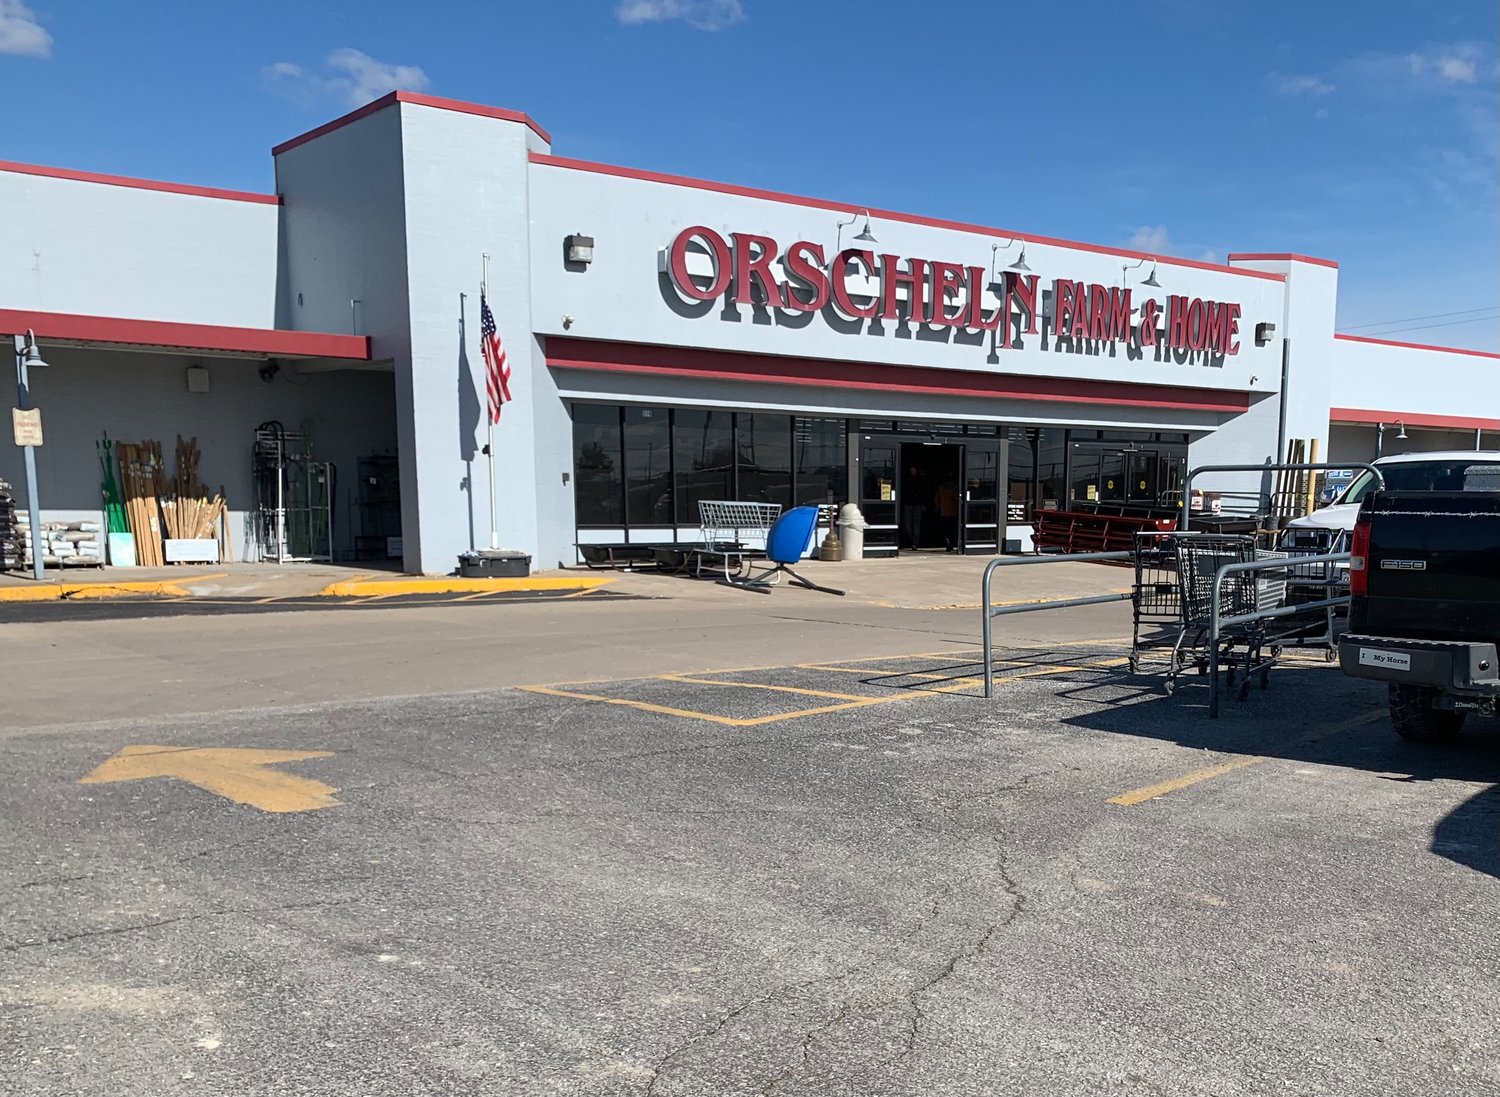 There are 168 Orscheln Farm & Home stores,including this one at 314 East Highway 24 in Moberly. (Michael Allshouse)